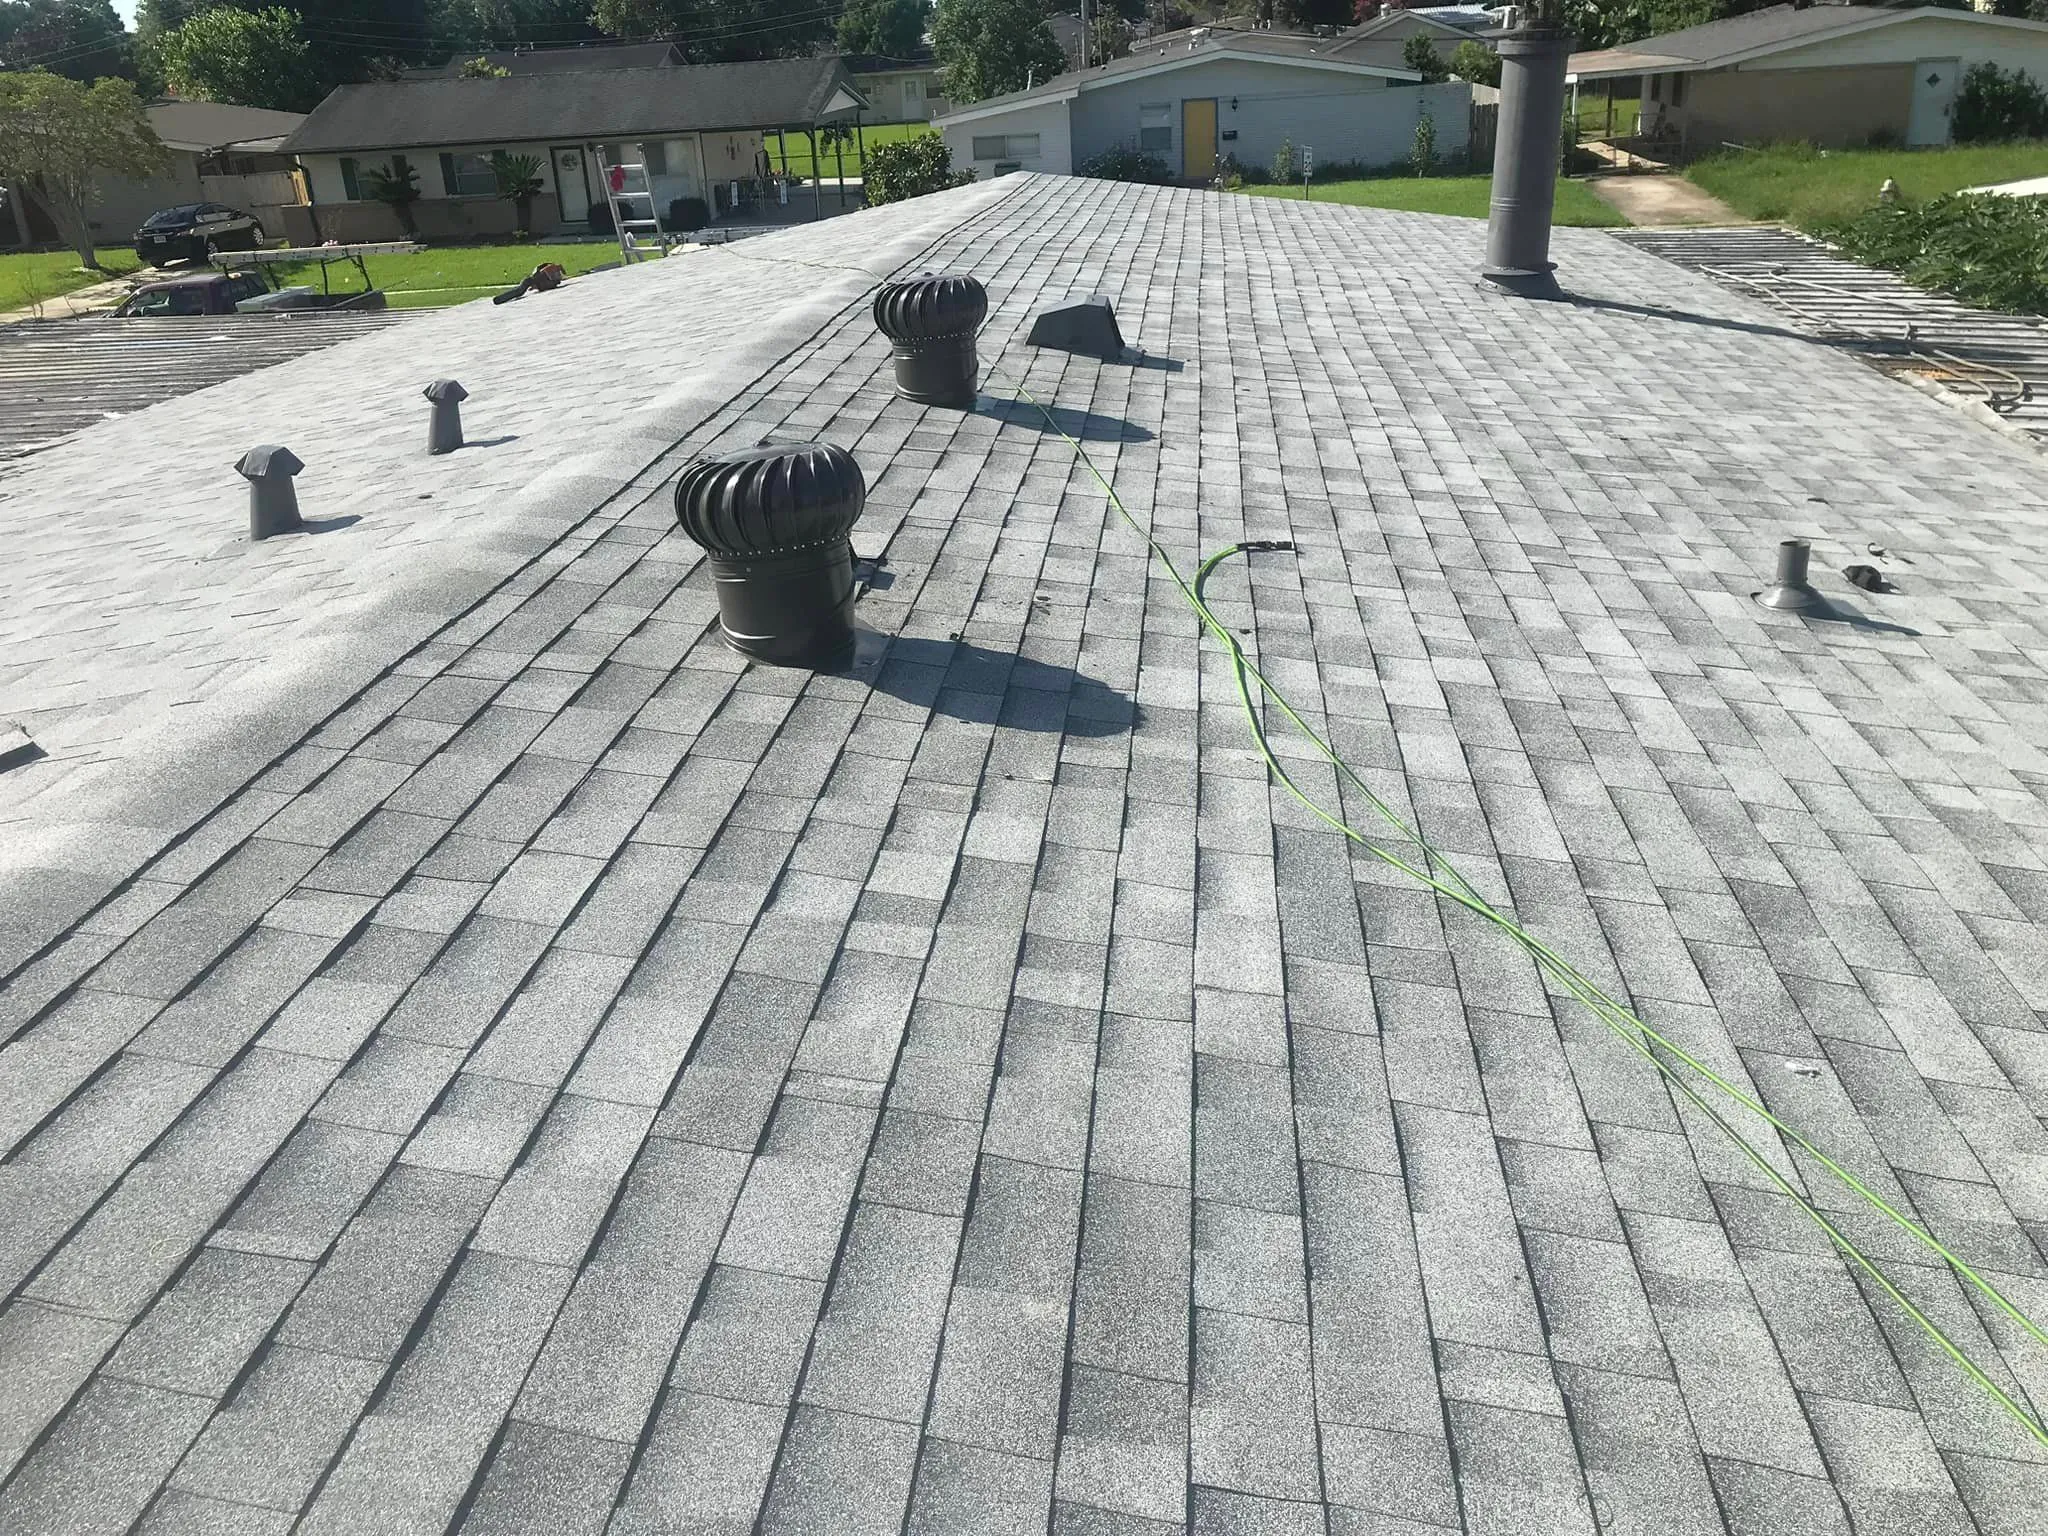 Roofing for Spectrum Roofing and Renovations in Metairie, LA